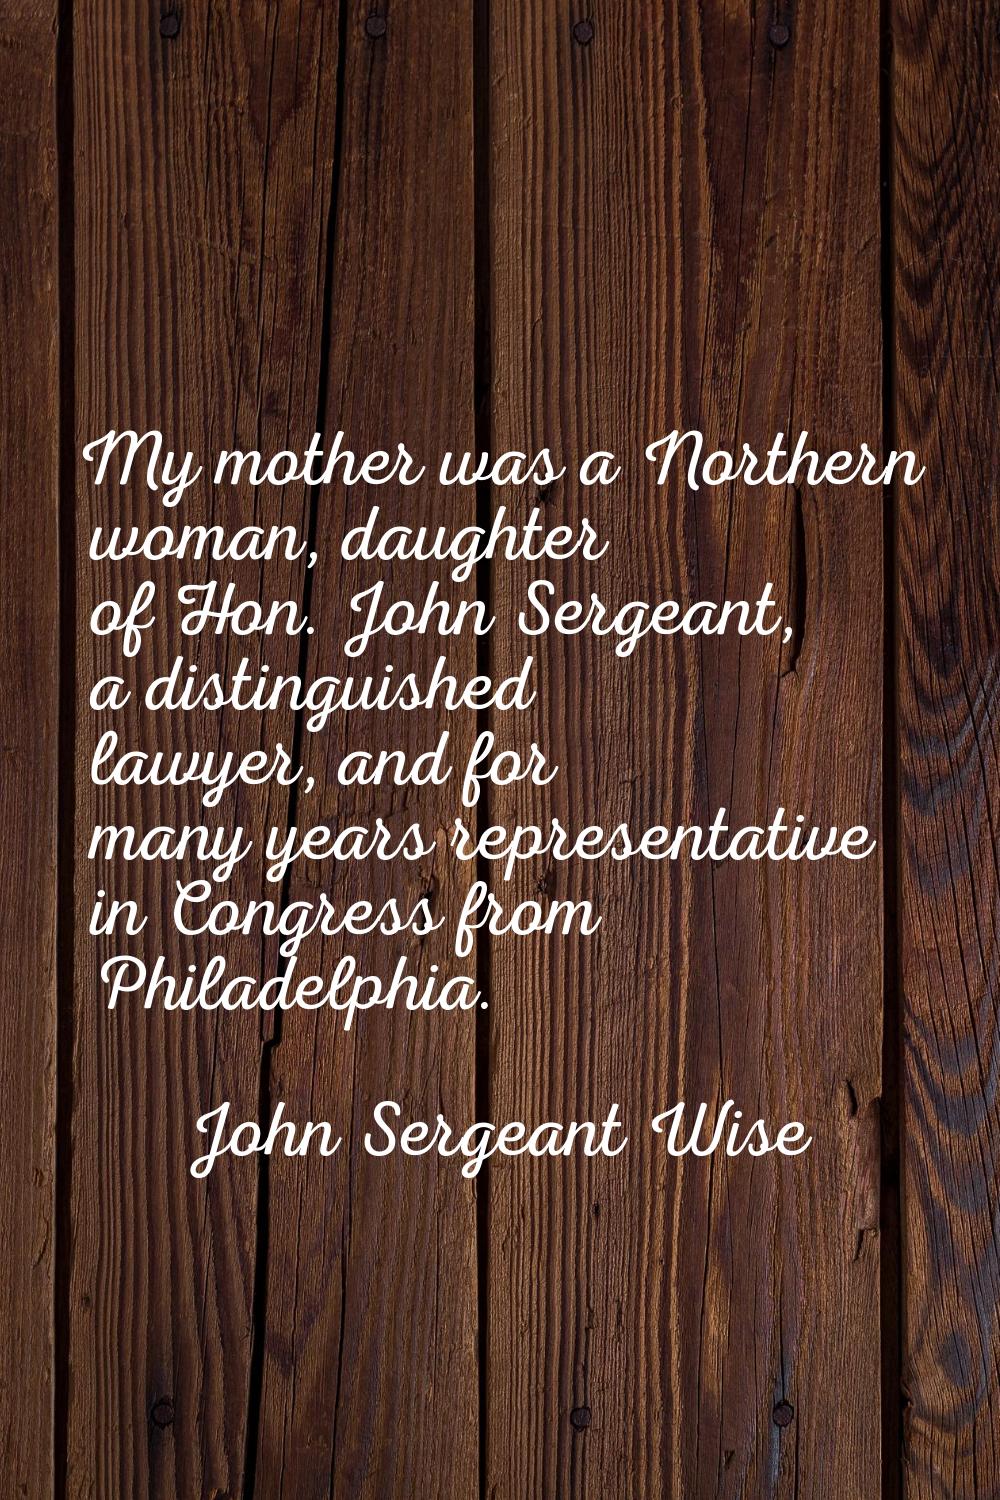 My mother was a Northern woman, daughter of Hon. John Sergeant, a distinguished lawyer, and for man